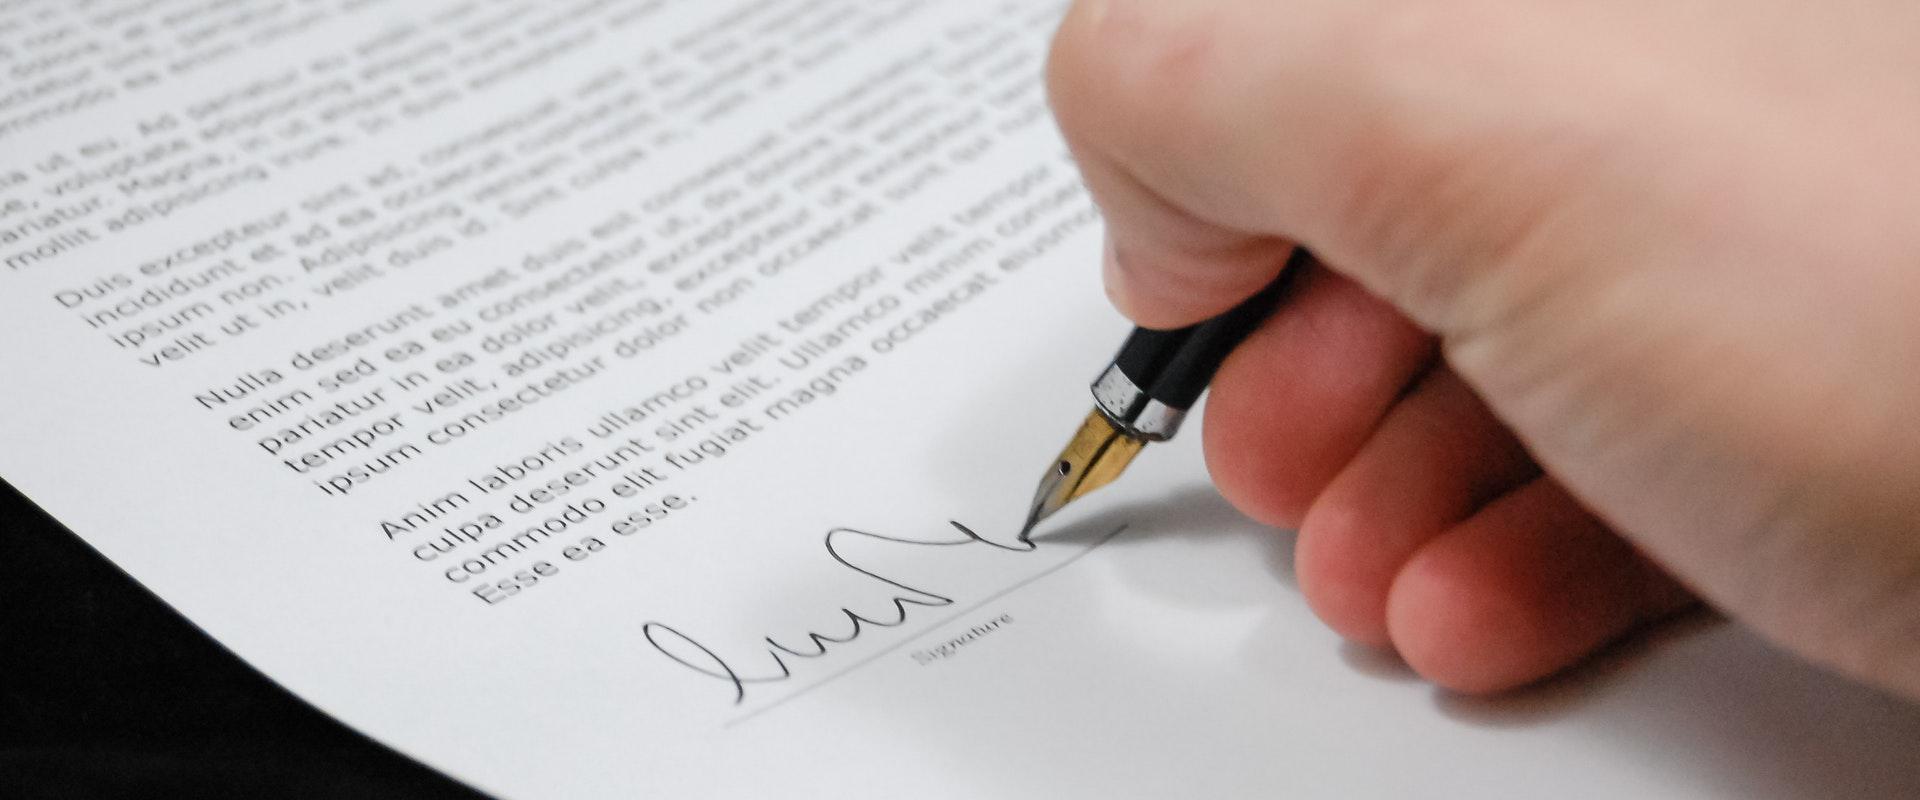 Auto date a document for the signing day on Legalesign